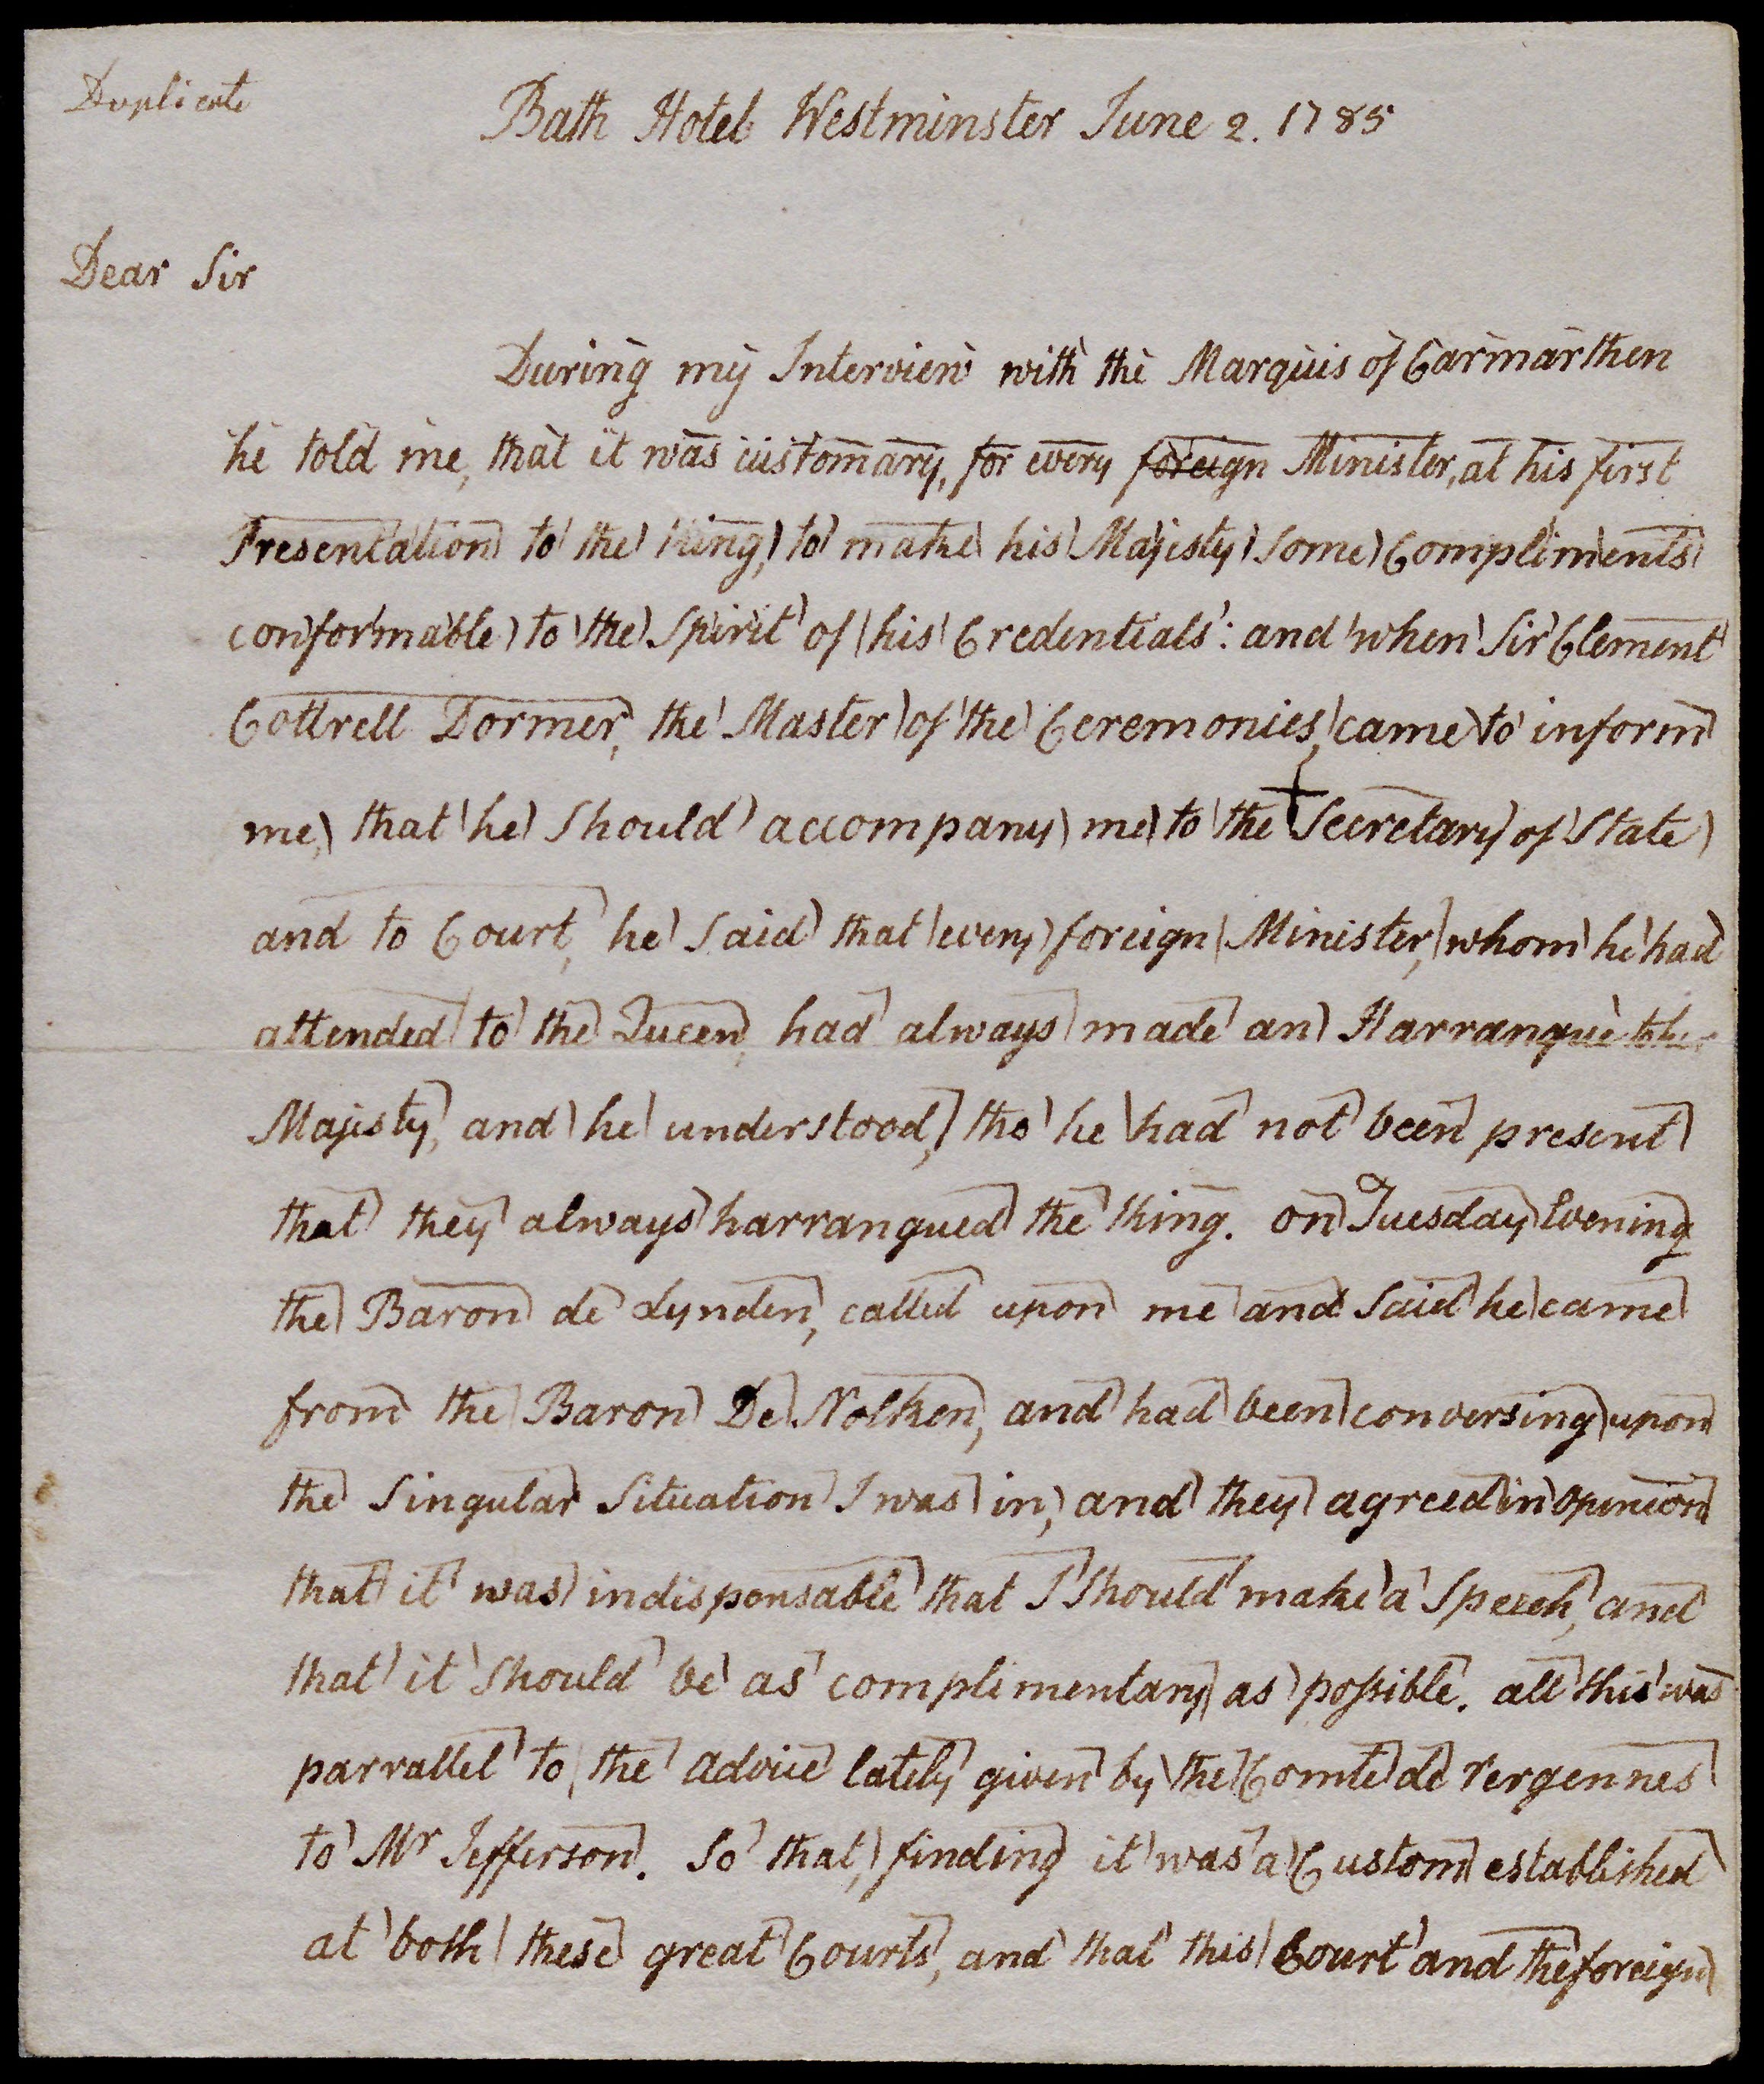 Historiography and Historical Methods (Hand written letter dated June 2, 1785)